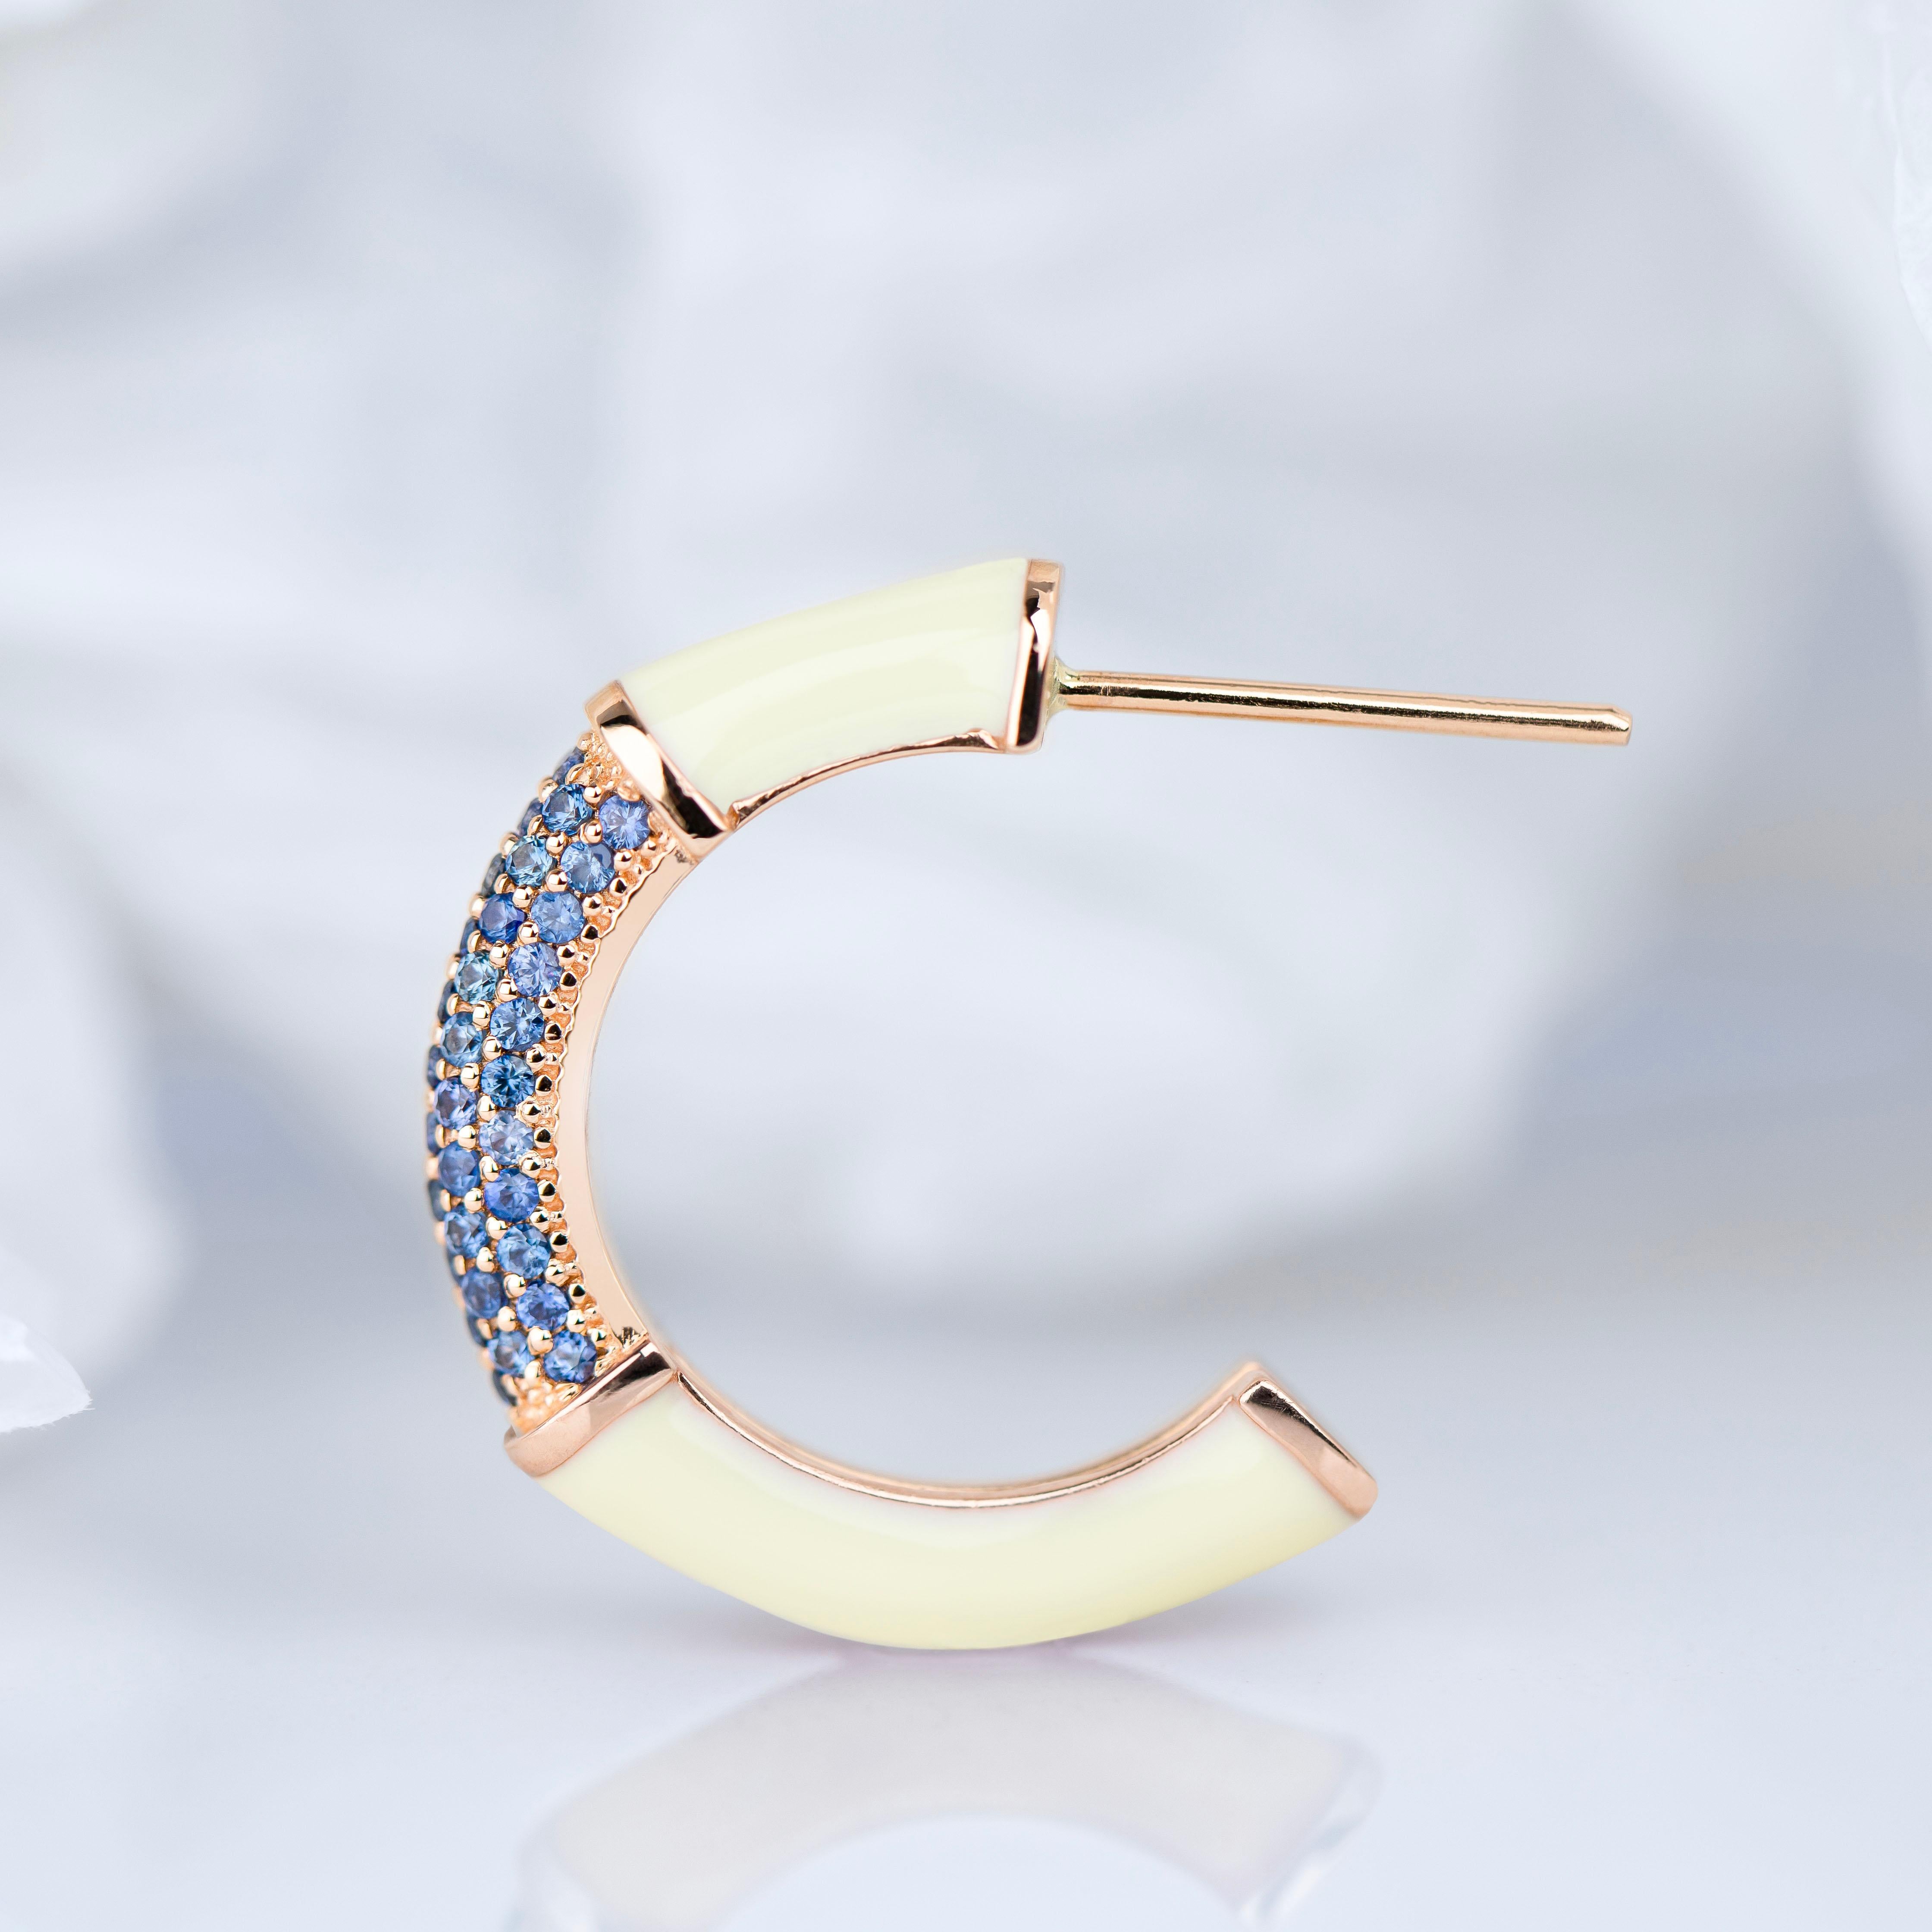 Art Deco Style Gold Earring with Sapphire Stone, Bumble Colors Earring

This ring was made with quality materials and excellent handwork. I guarantee the quality assurance of my handwork and materials. It is vital for me that you are totally happy